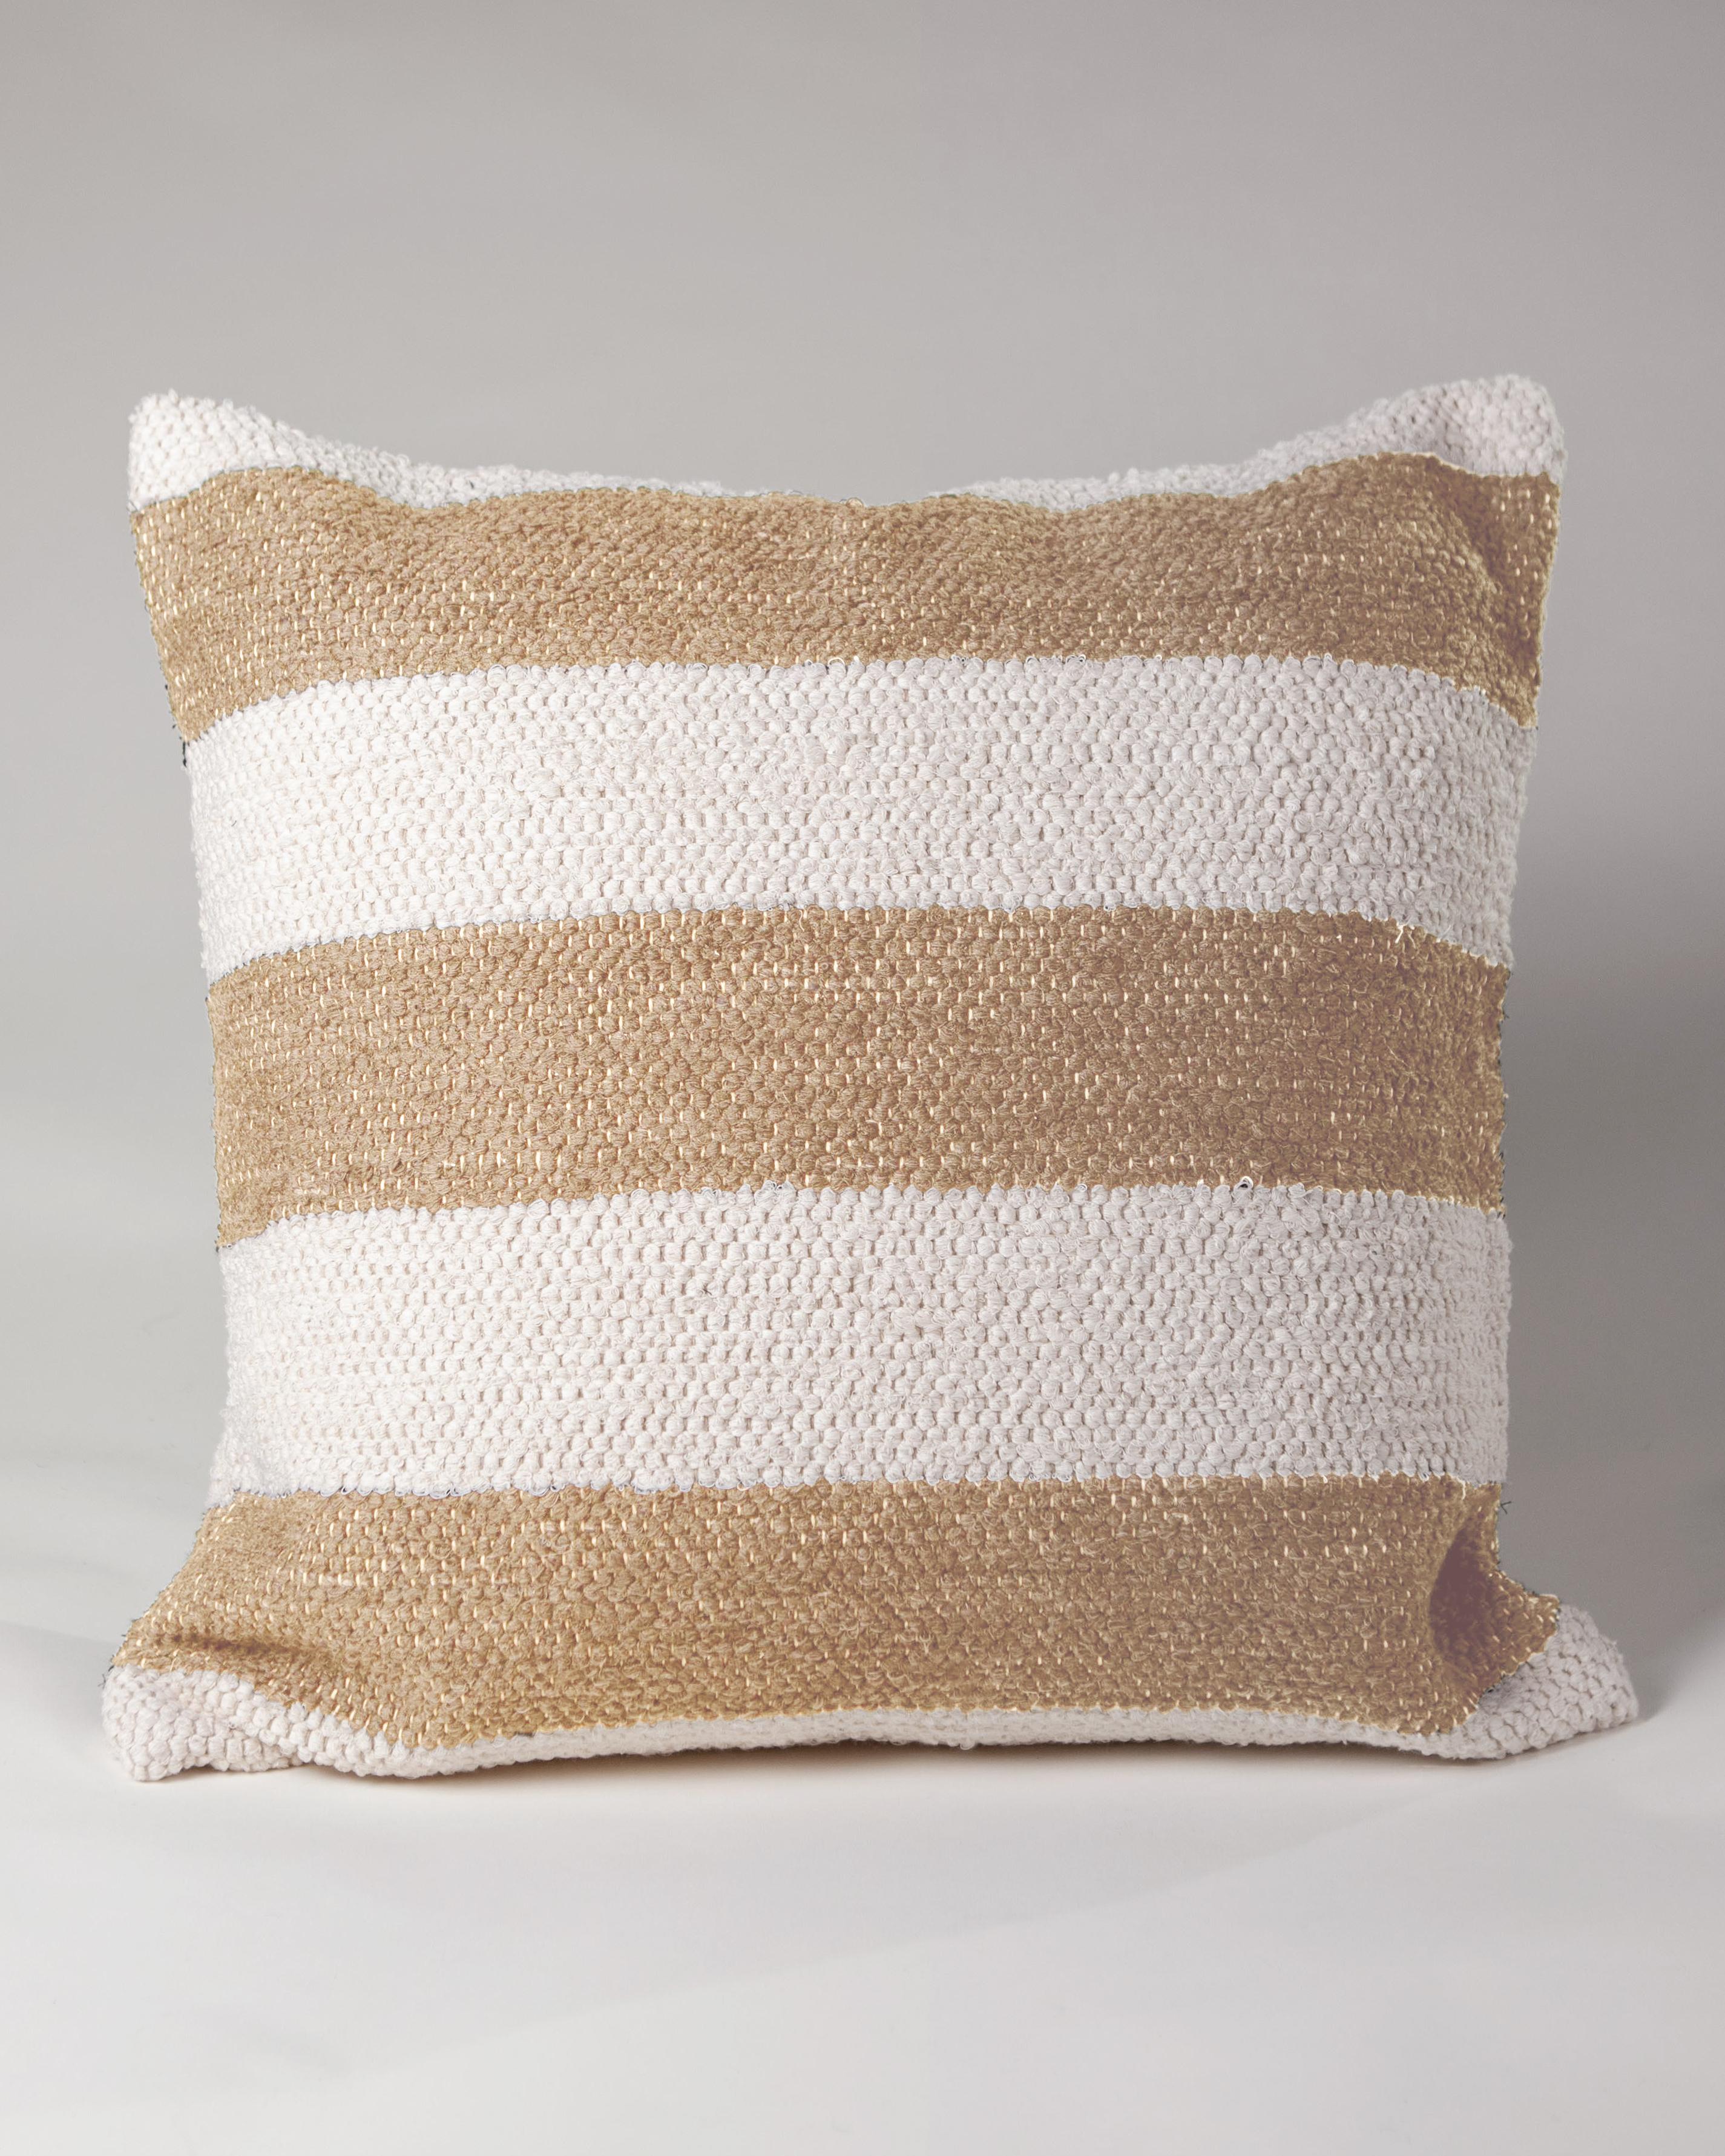 Portuguese Casa Cubista Textured Cotton Camel Beige Stripe Throw Pillow, In Stock For Sale